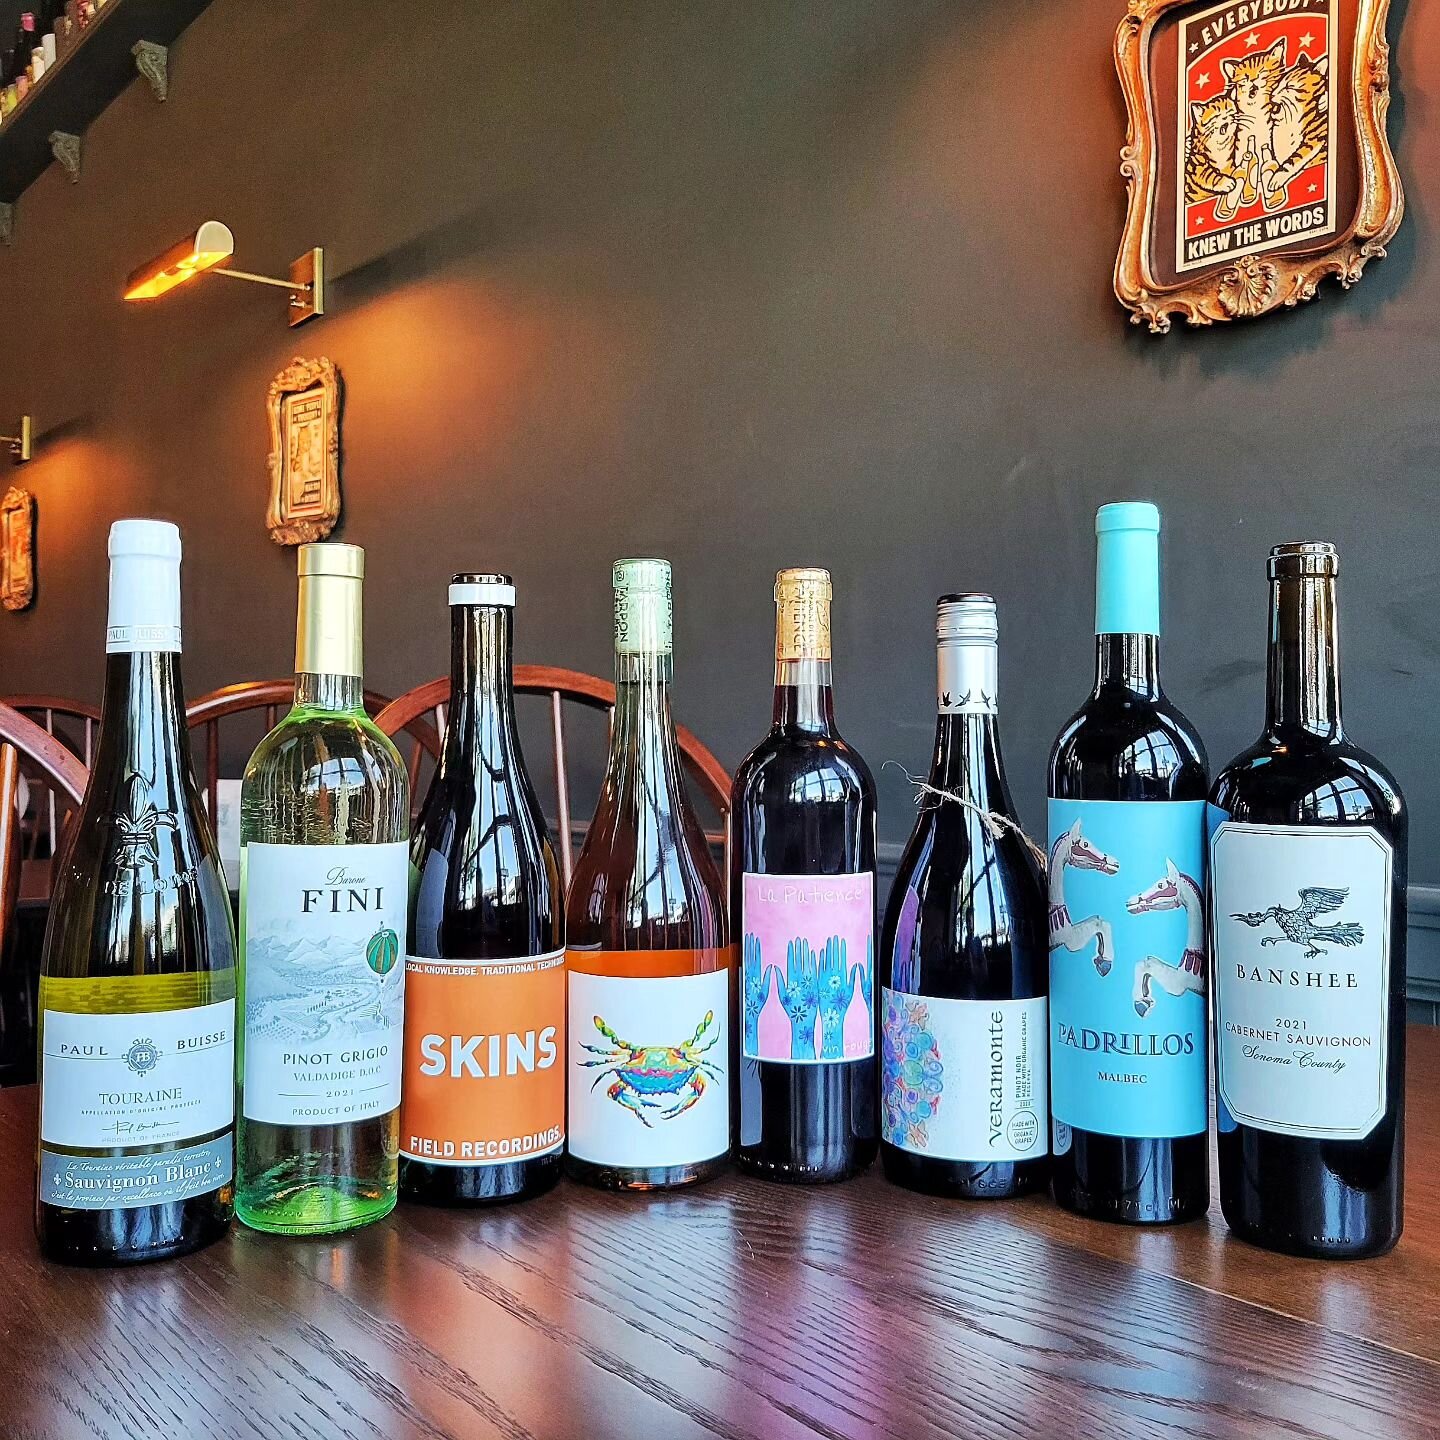 We are bracing ourselves for the scorching heat and we've got the perfect solution to keep you cool and refreshed!

Our wine menu just underwent a sensational makeover, featuring an exquisite selection of icy, invigorating wines that will make your t